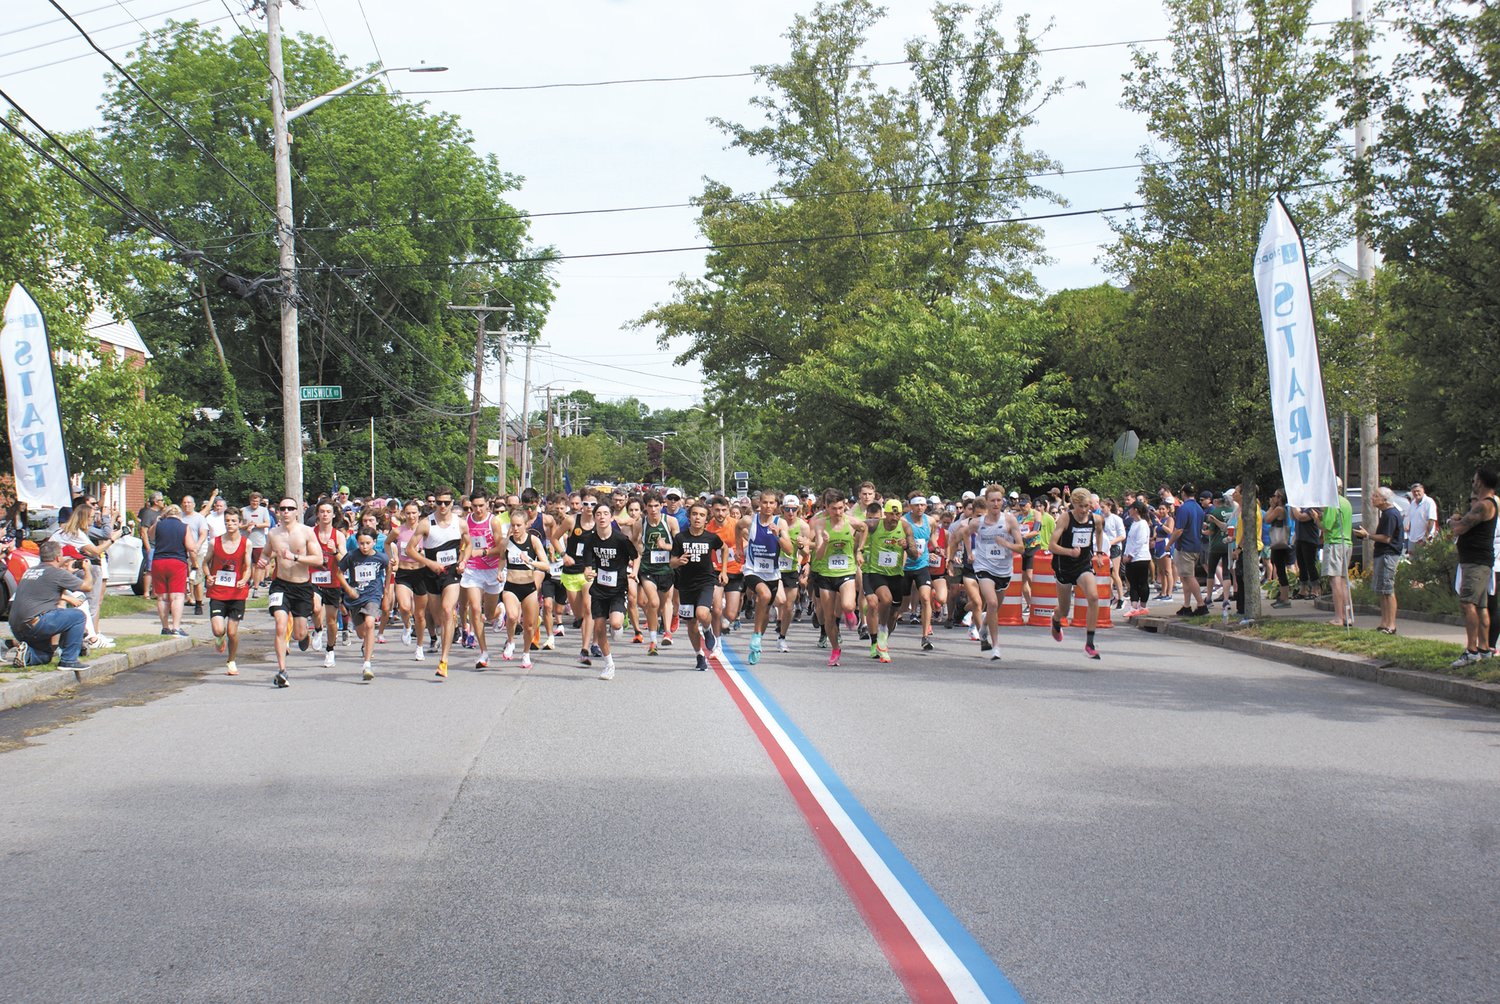 ON YOUR MARK, GET SET, GO:  The start of the 5K road race went off at 9:30 a.m. (Photo by Steve Popiel)